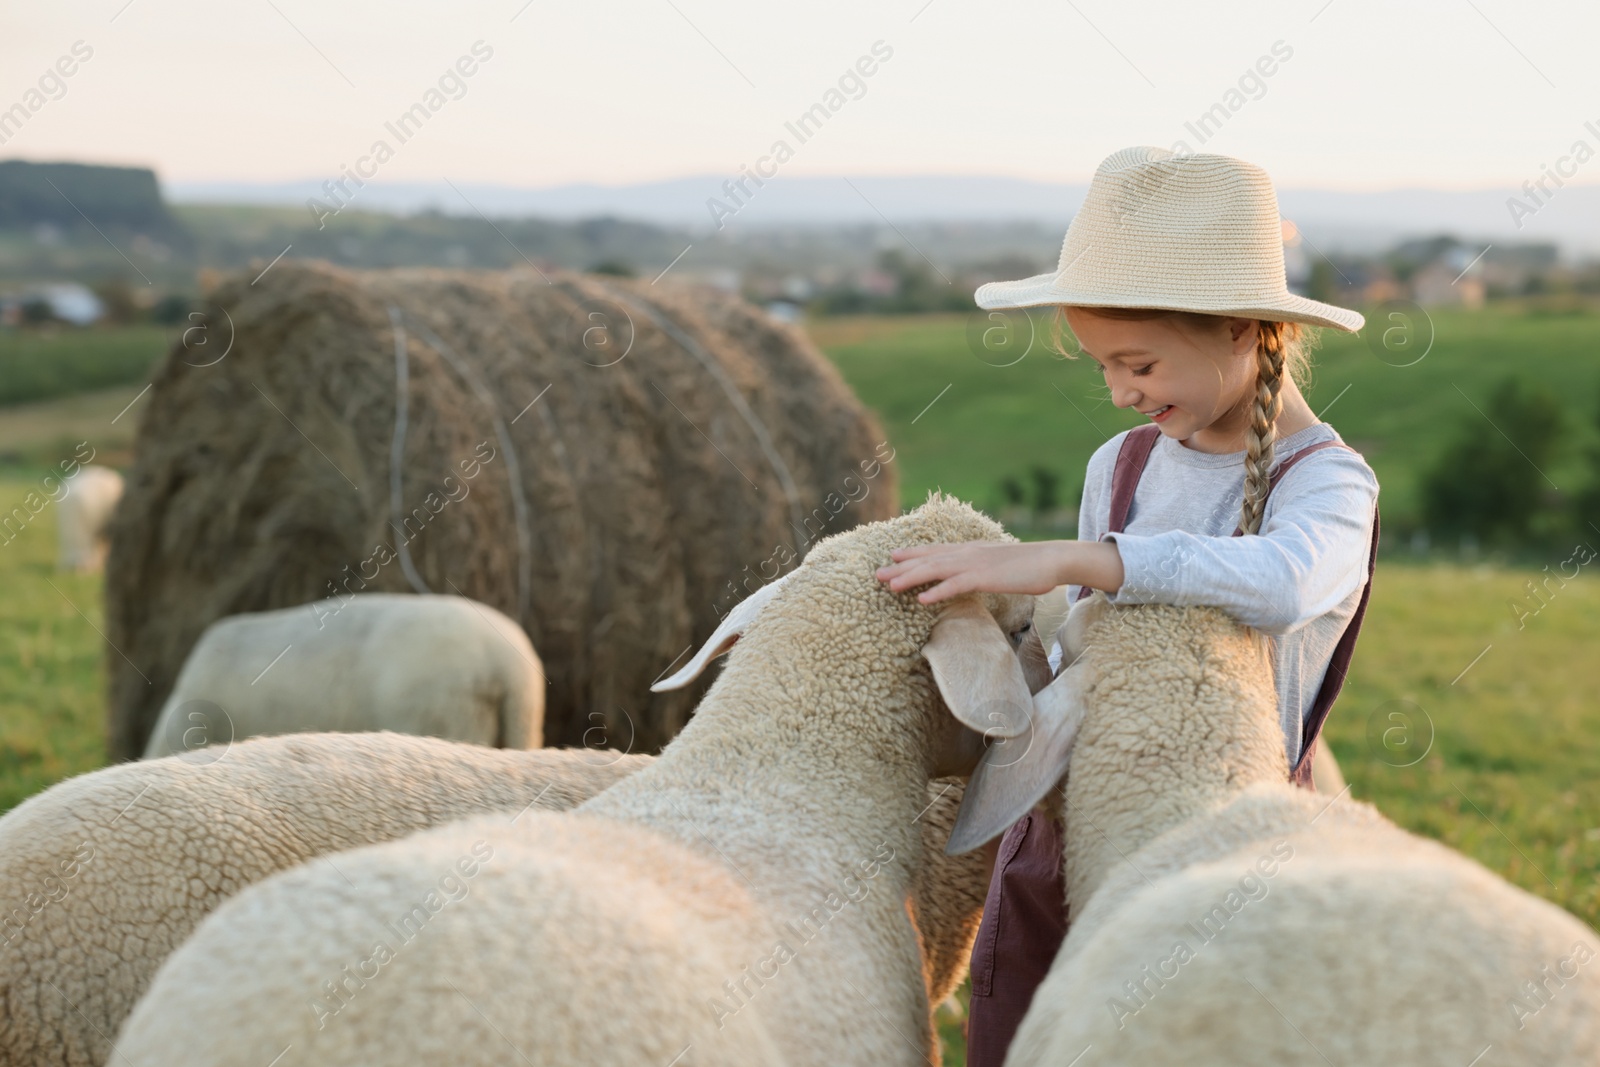 Photo of Girl with sheep on pasture. Farm animals